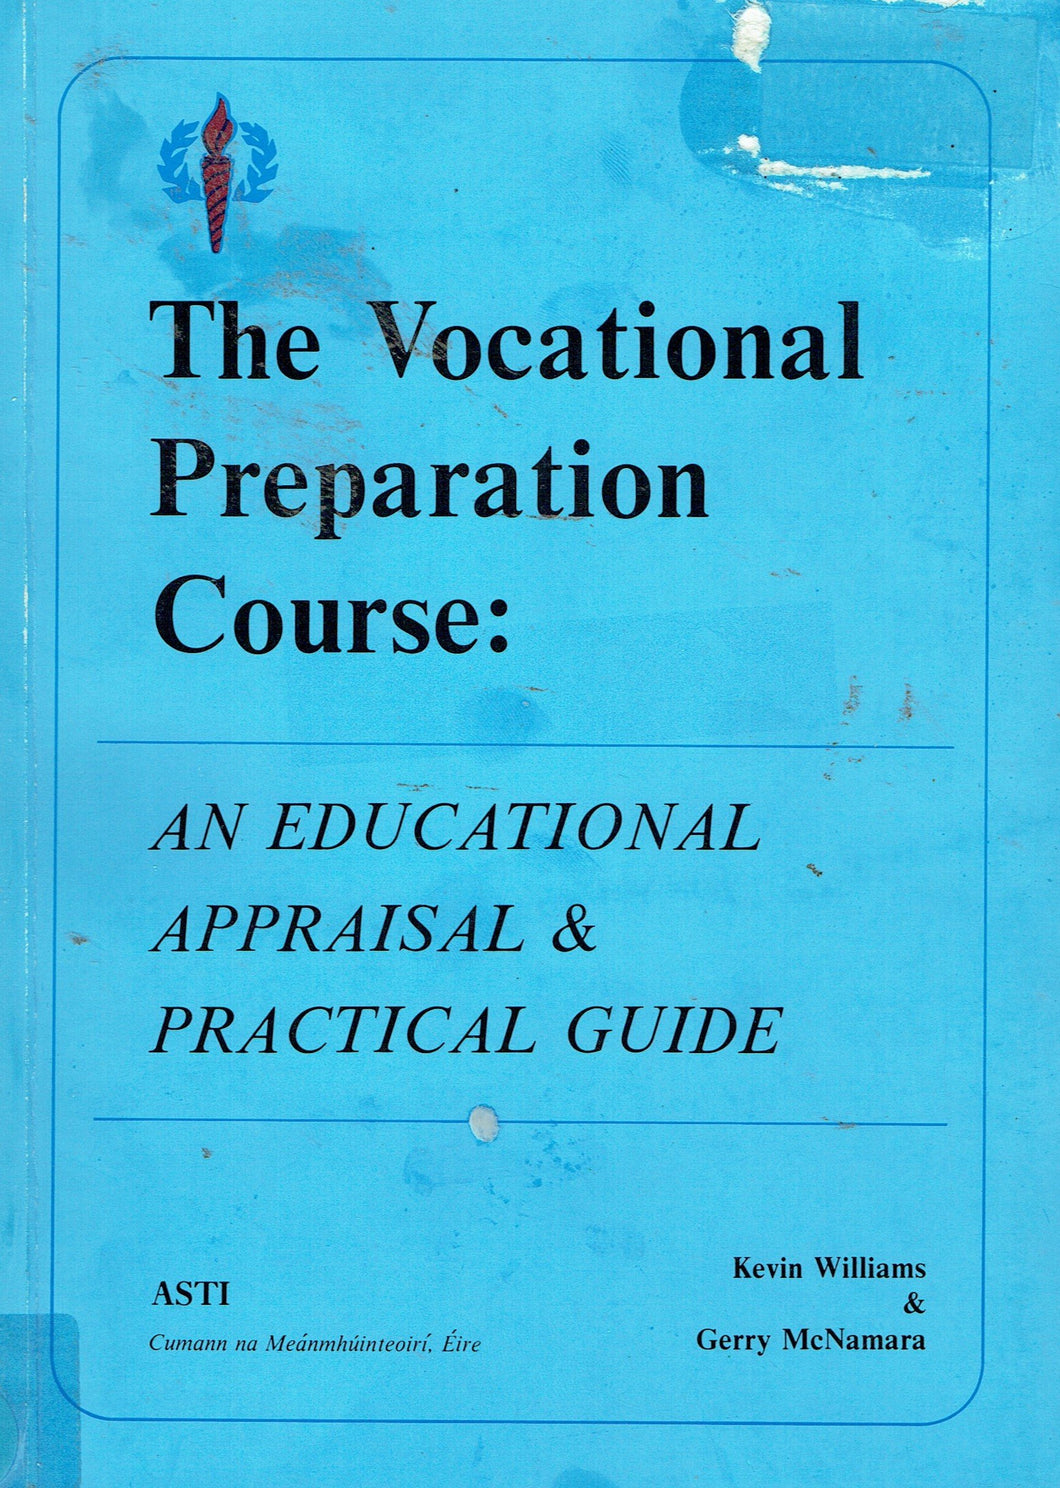 The vocational preparation course: An educational appraisal & practical guide